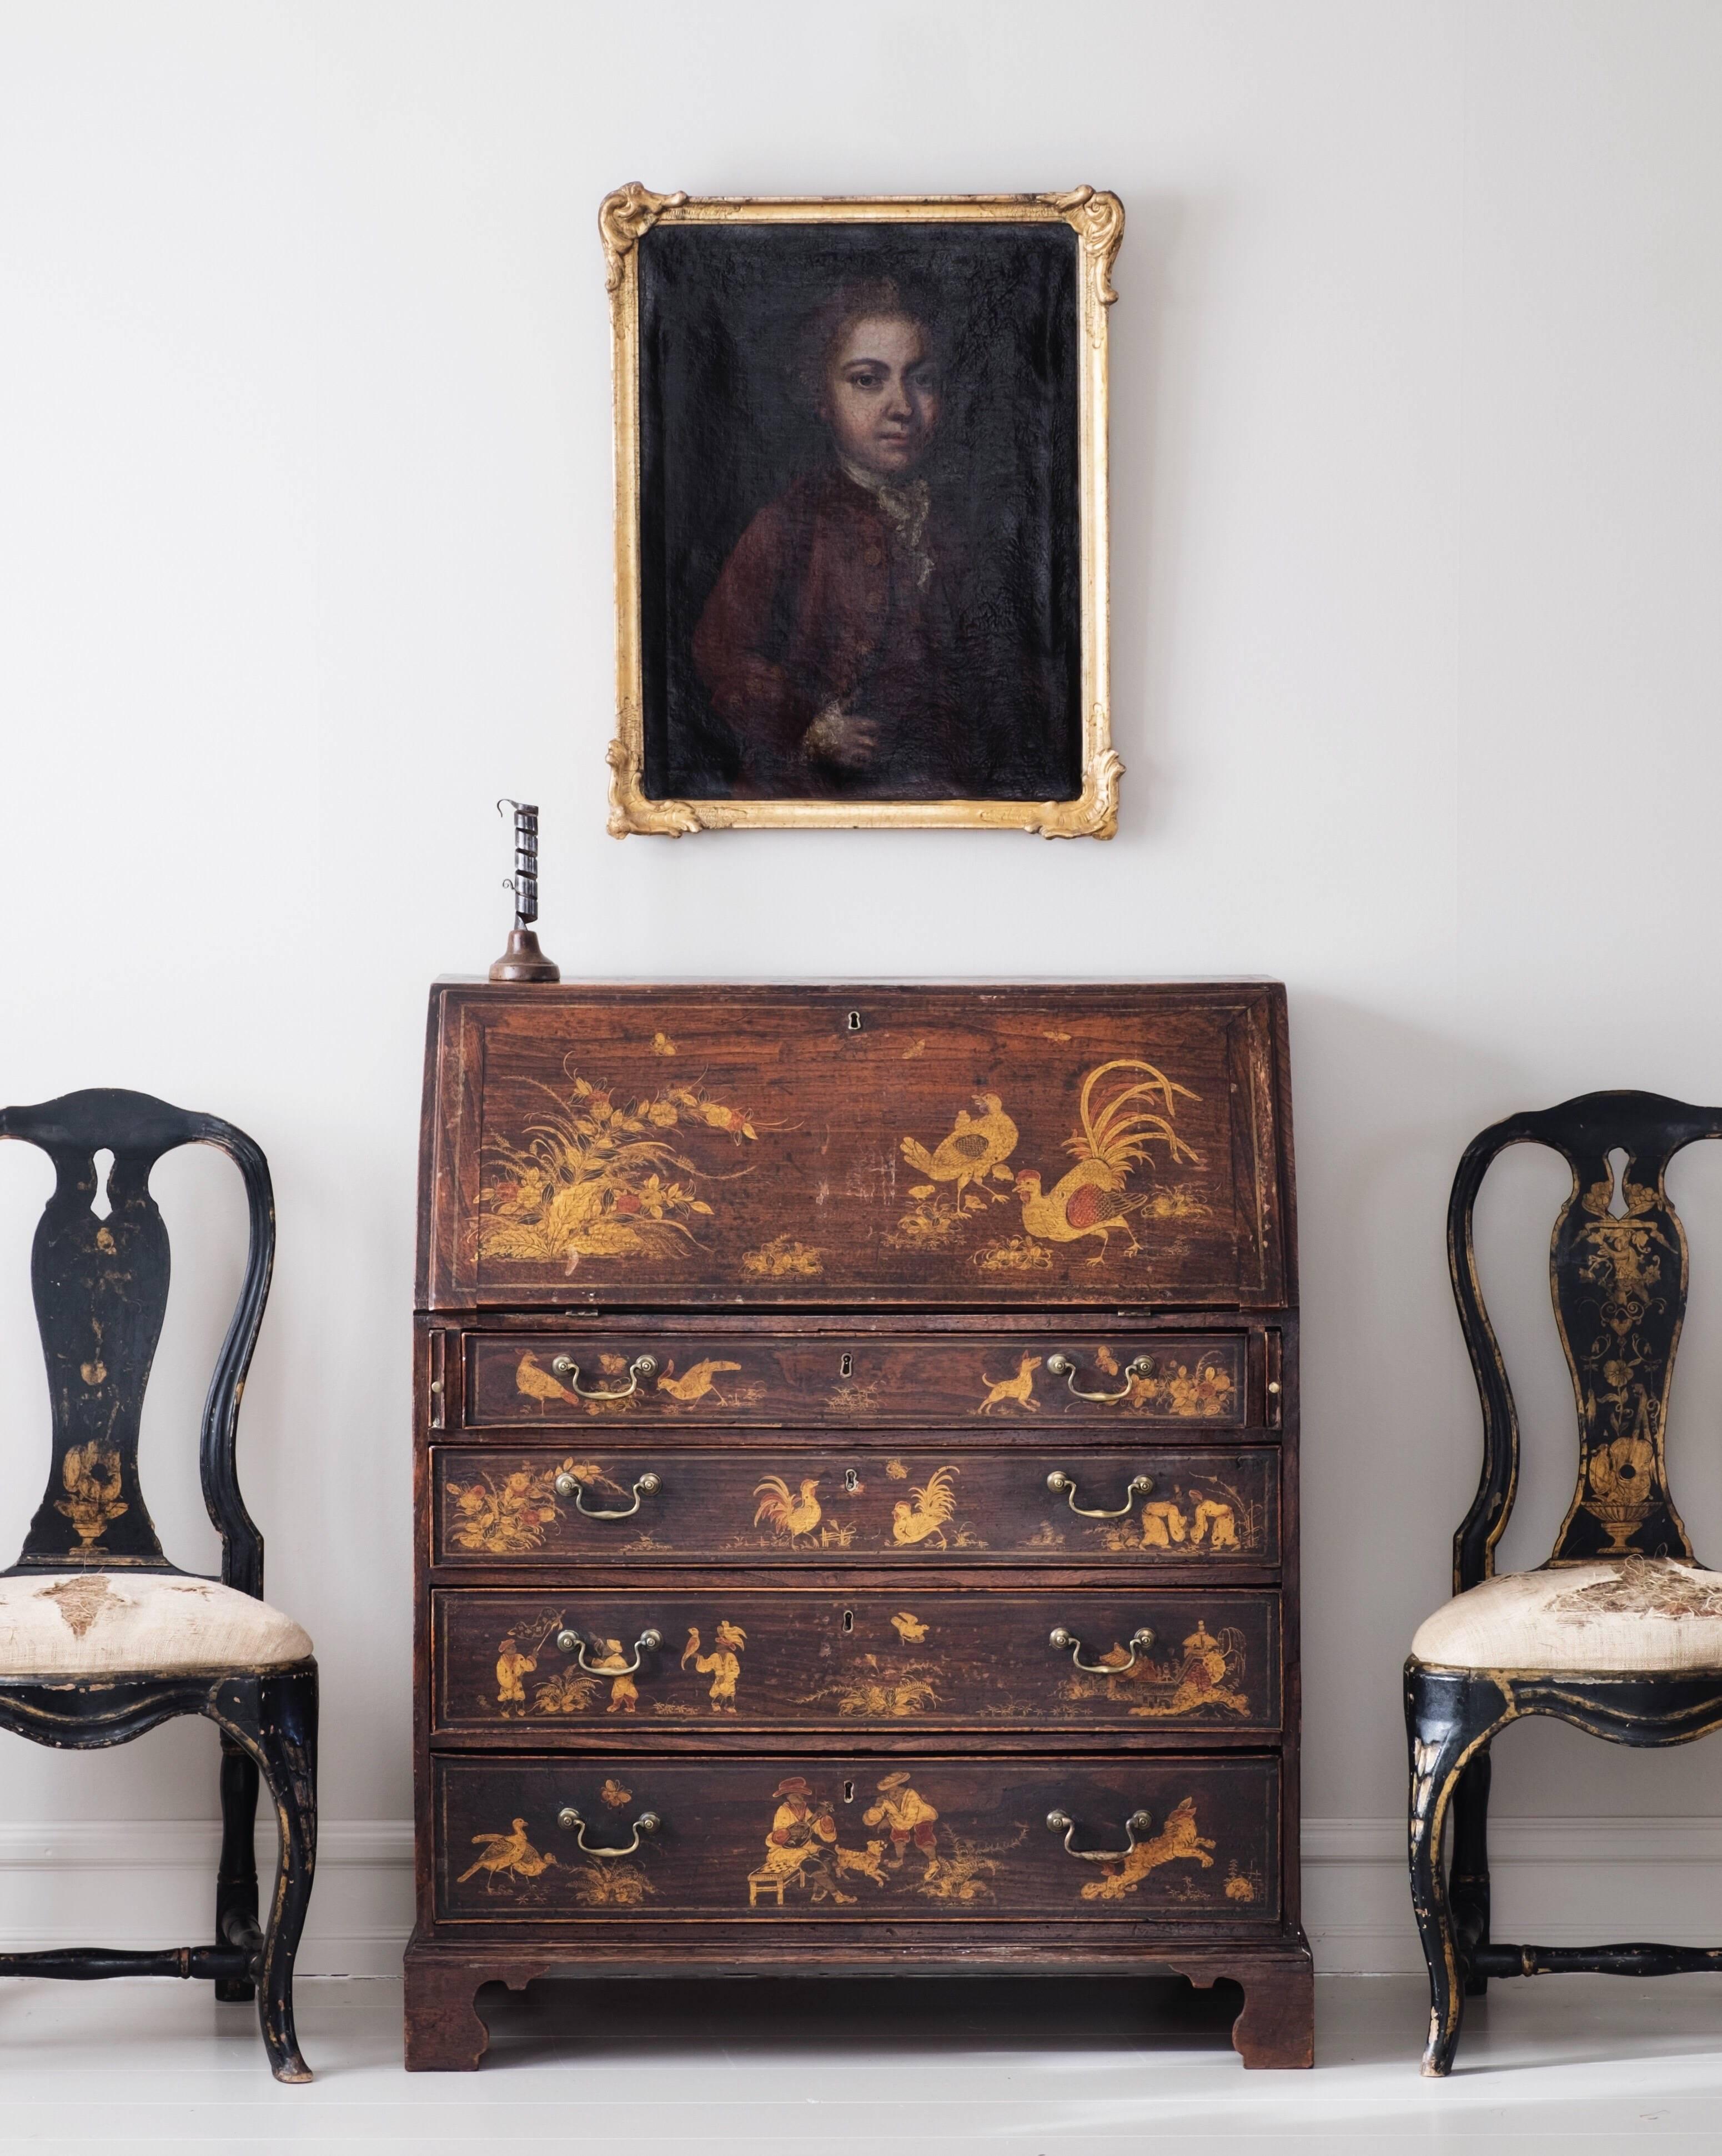 A fine Georgian original japanned chinoiserie bureau. A very interesting and rare piece with an amazing sophistication to the chinoiserie Most likely English, the second half of the 18th century.